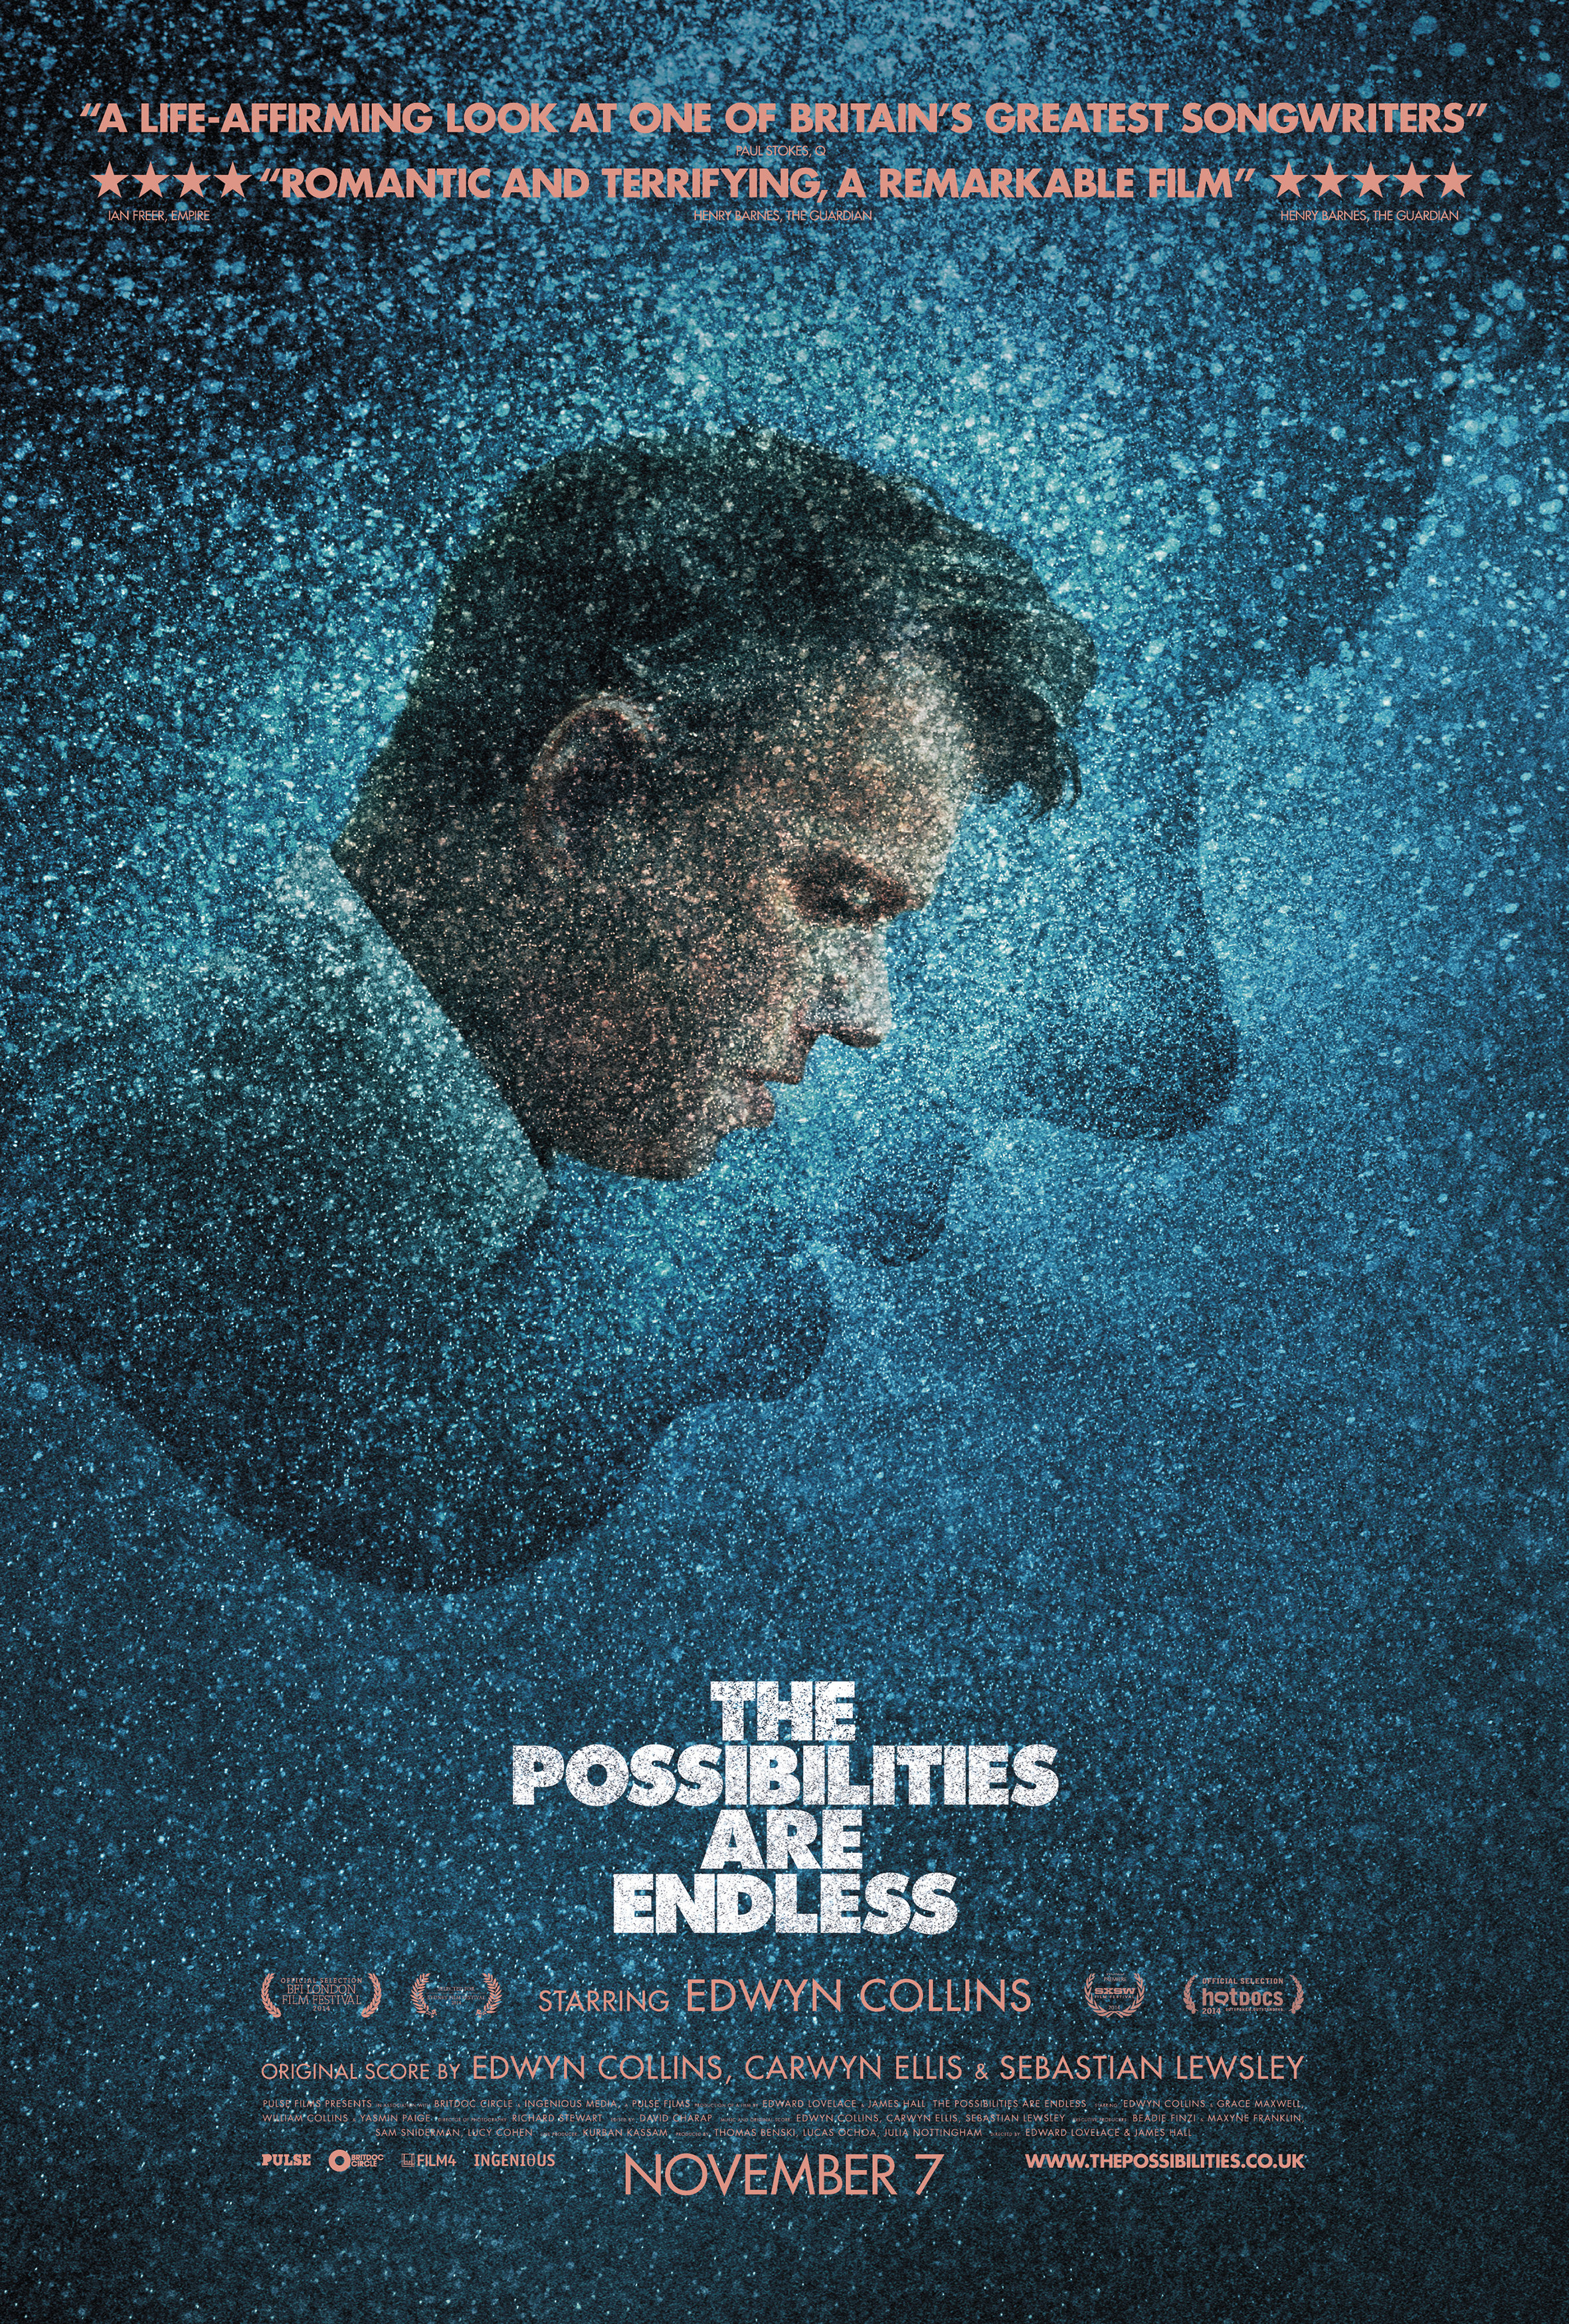 The Possibilities Are Endless (2014) starring Edwyn Collins on DVD on DVD